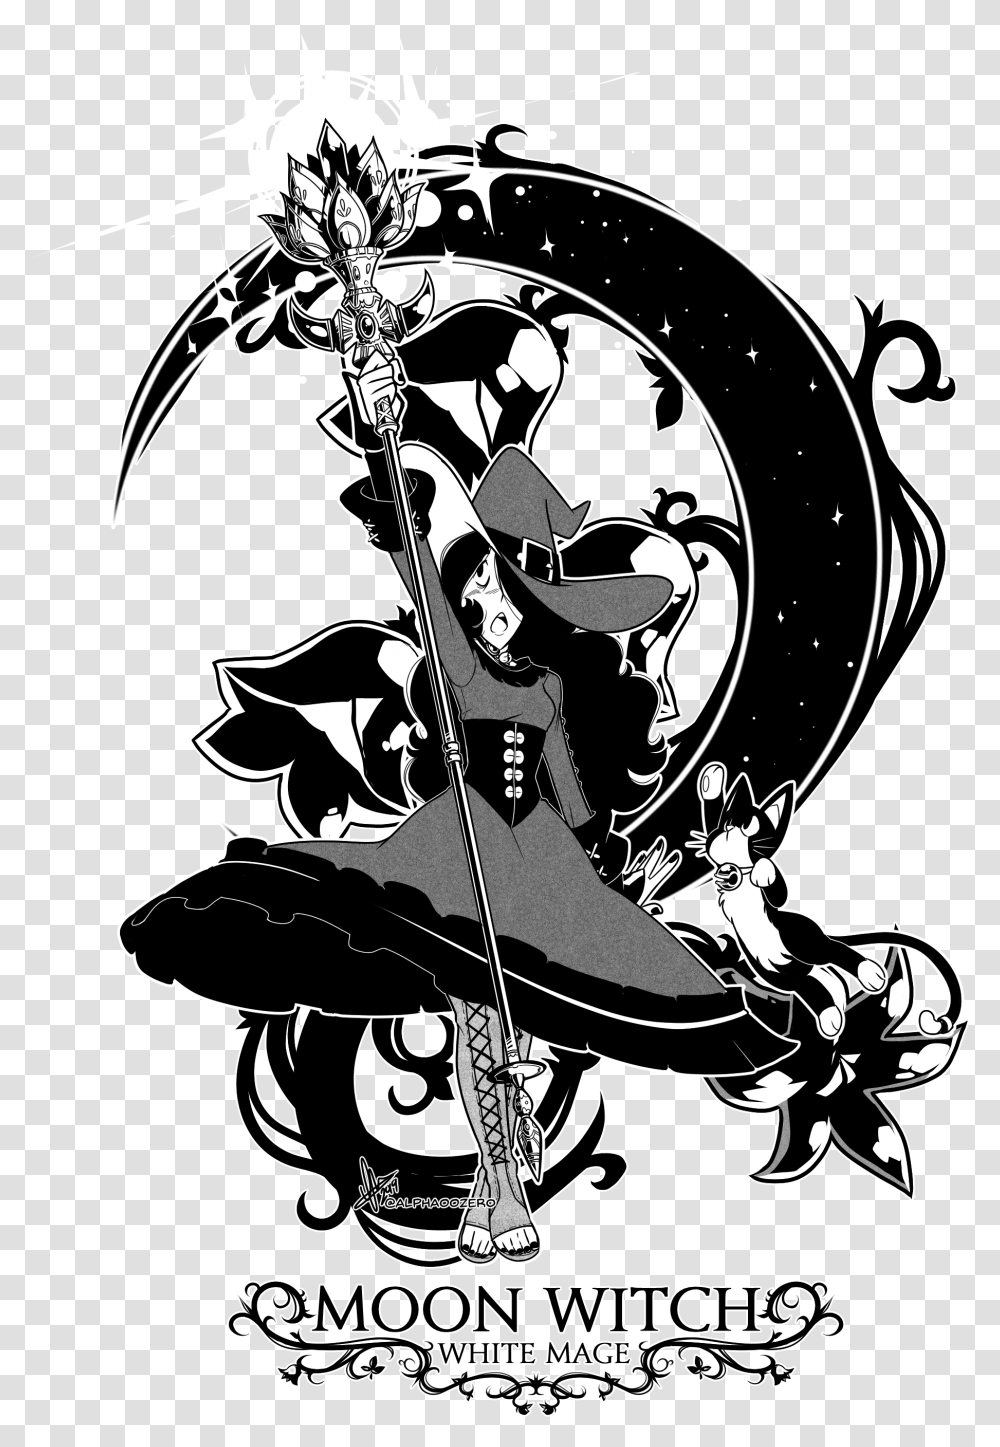 Moon Witch Illustration, Poster, Advertisement Transparent Png